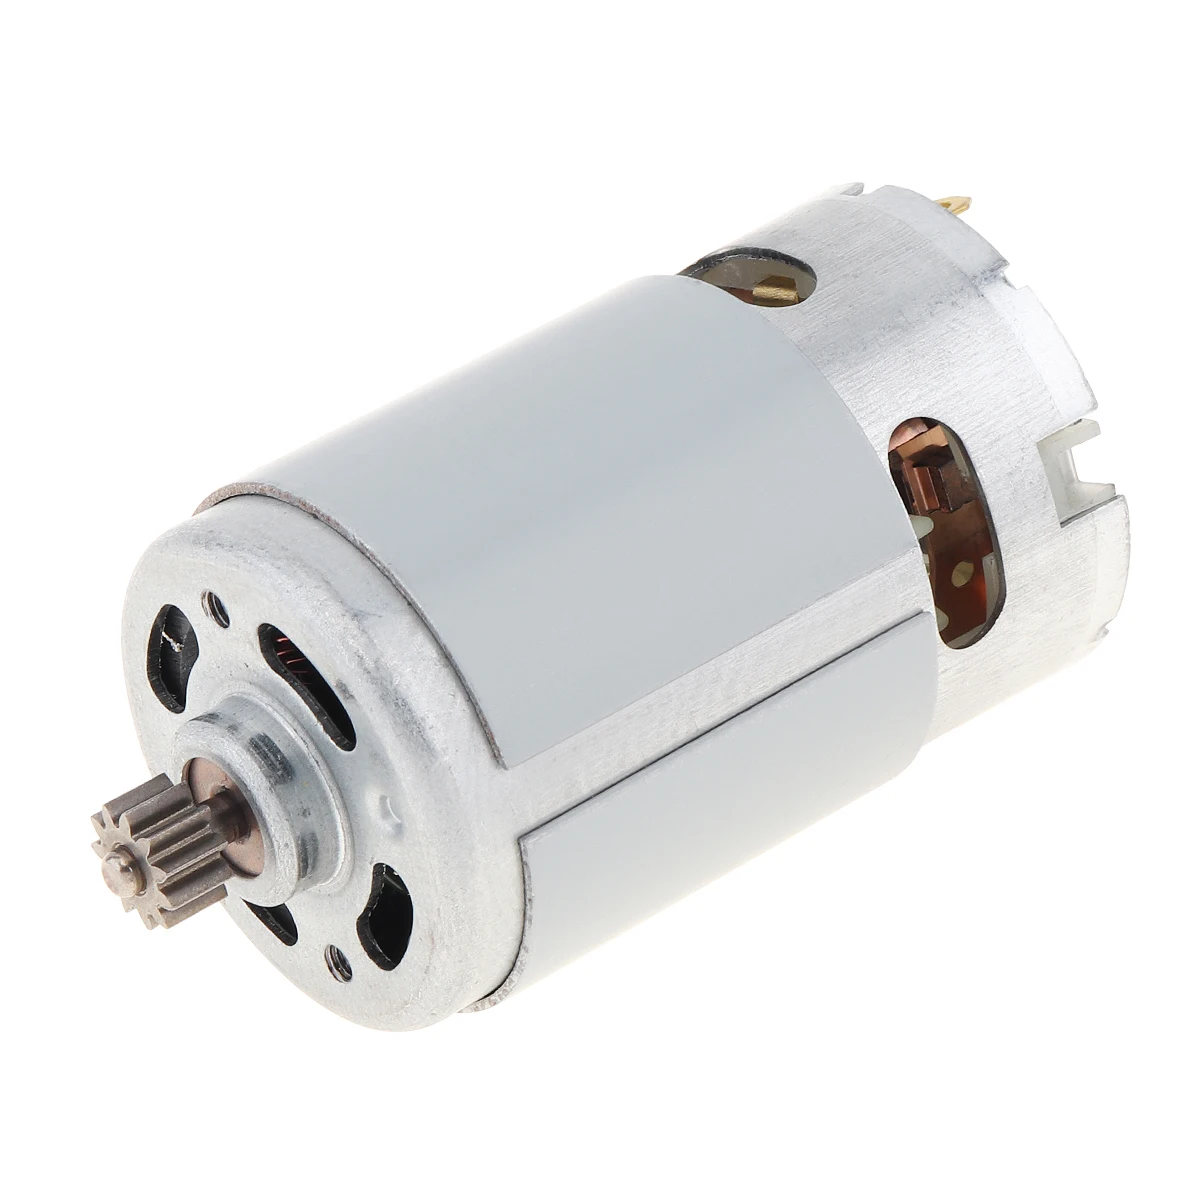 RS550 18V DC Motor 11 Teeth Two-speed High Torque Gear Box for Cordless Electric 